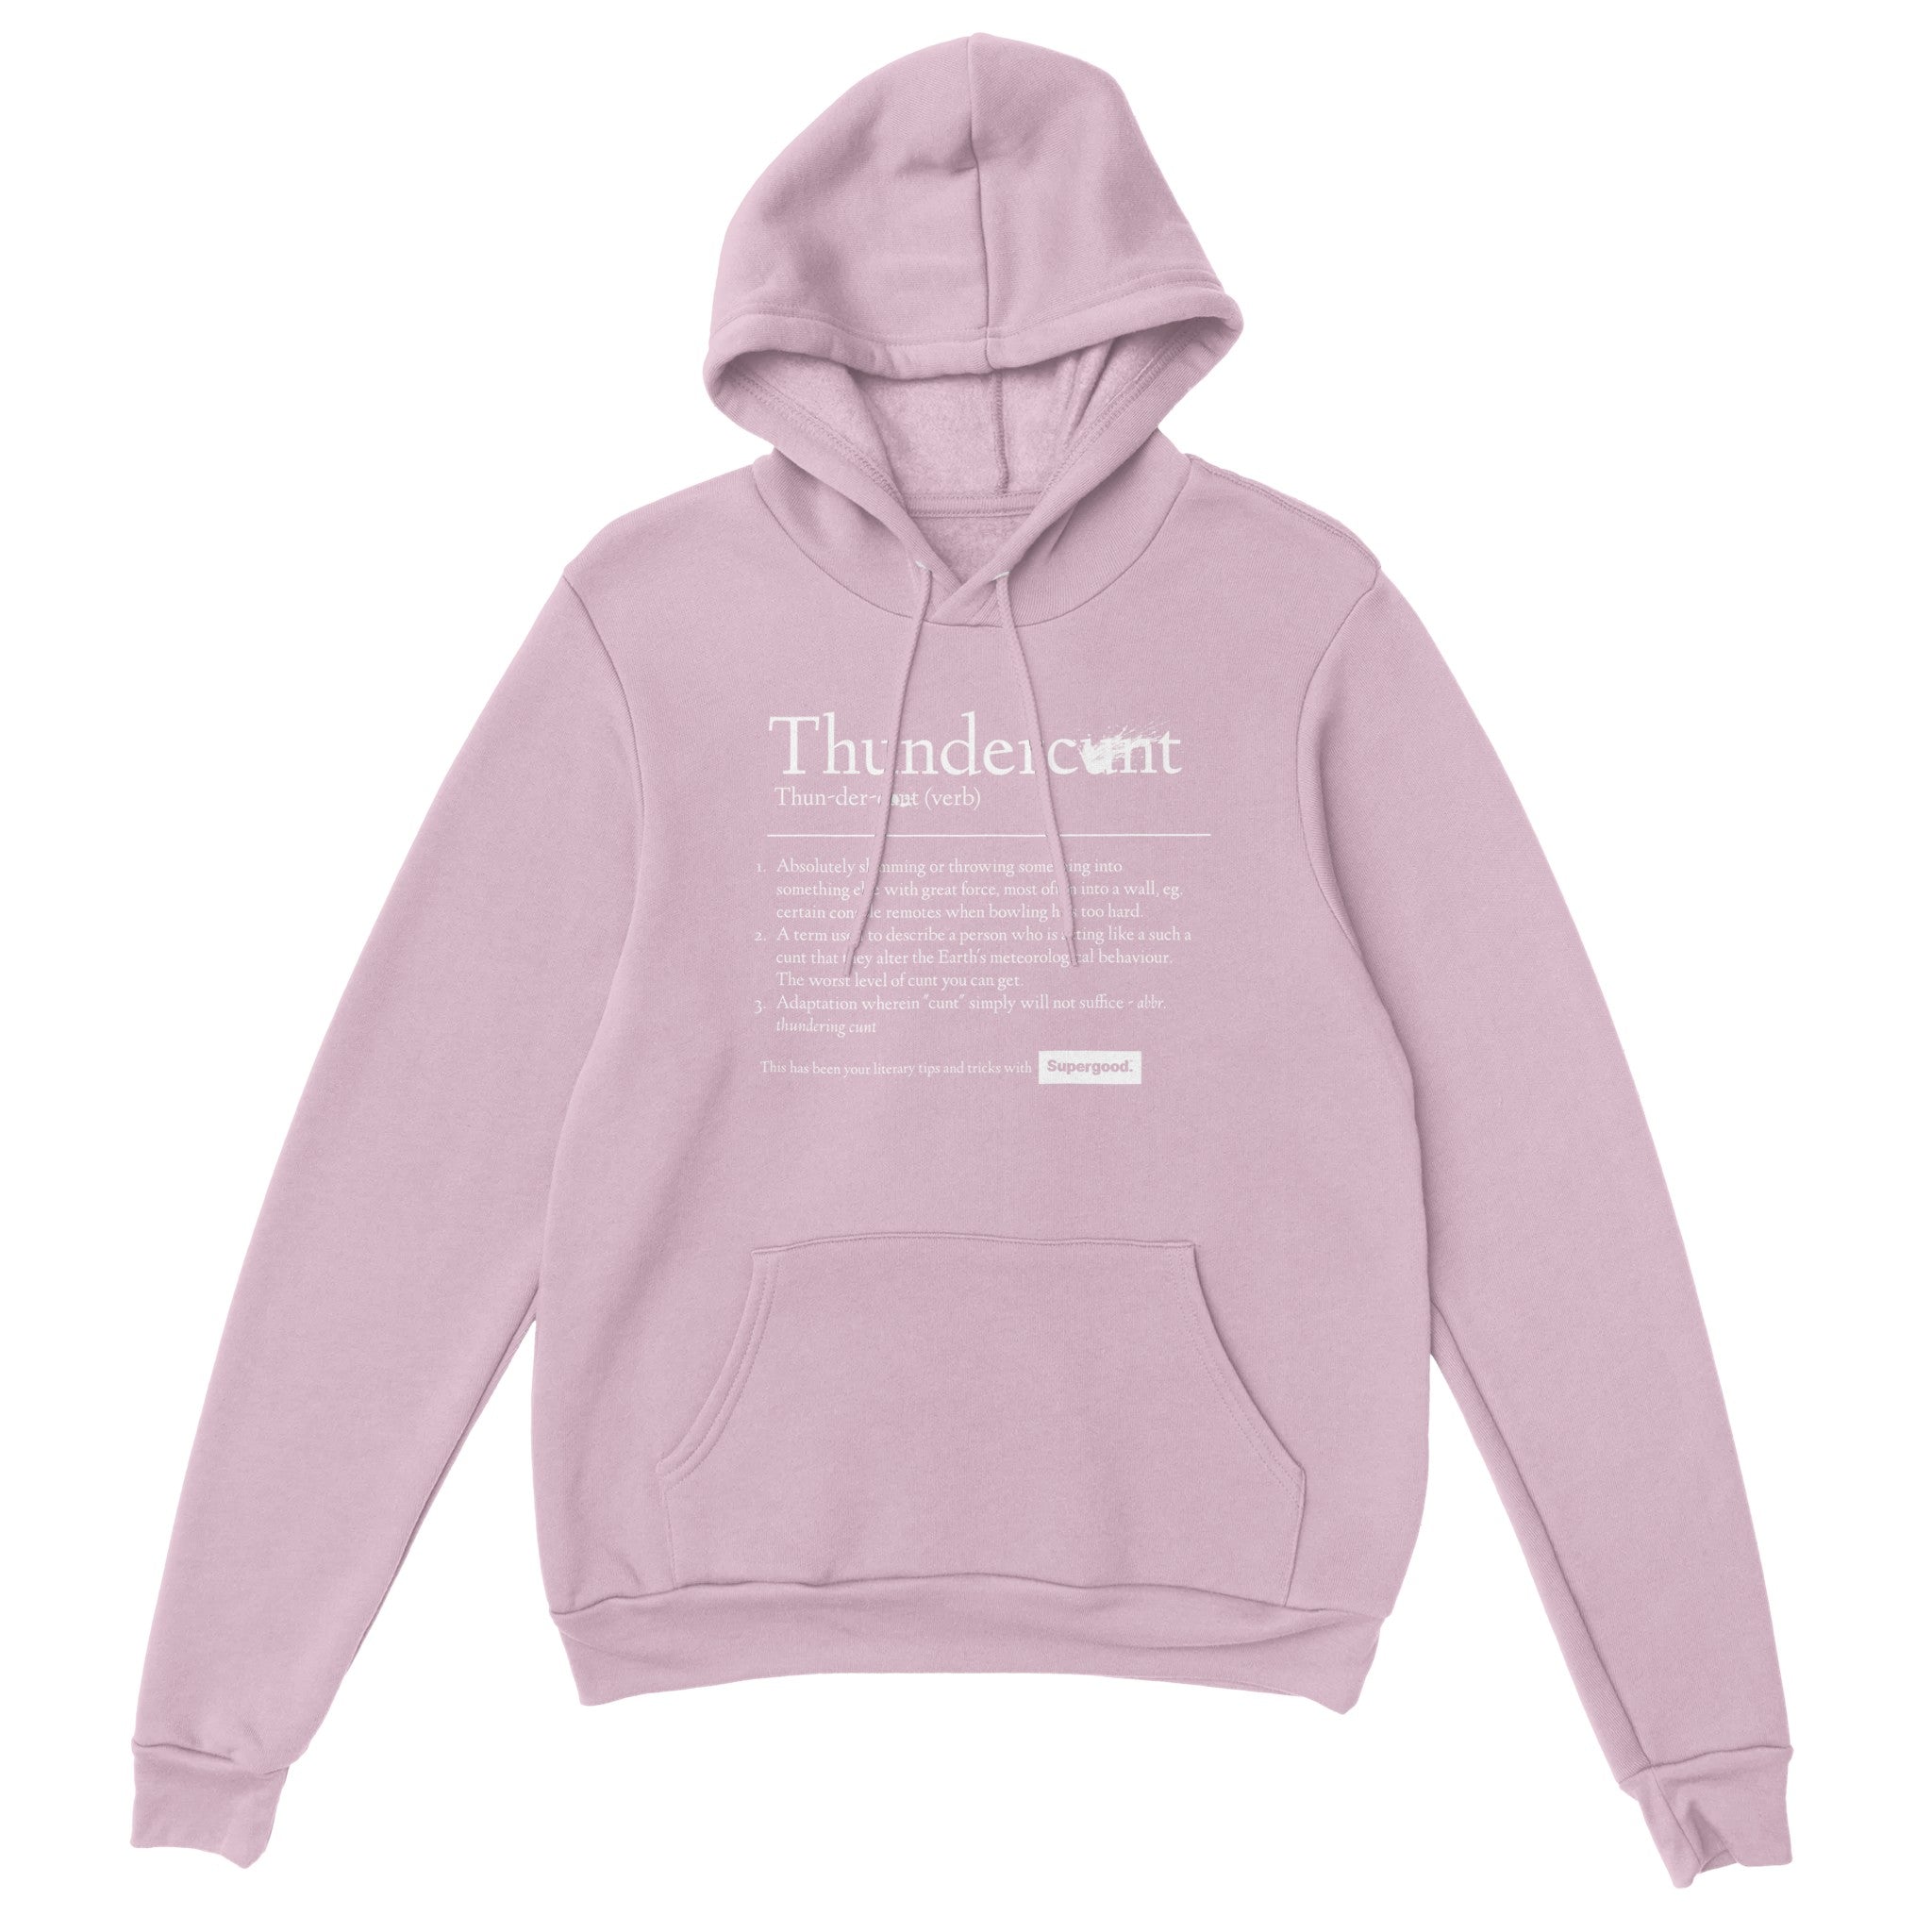 Thunderc*nt Hoodie, White Text by Supergood.-Supergood.